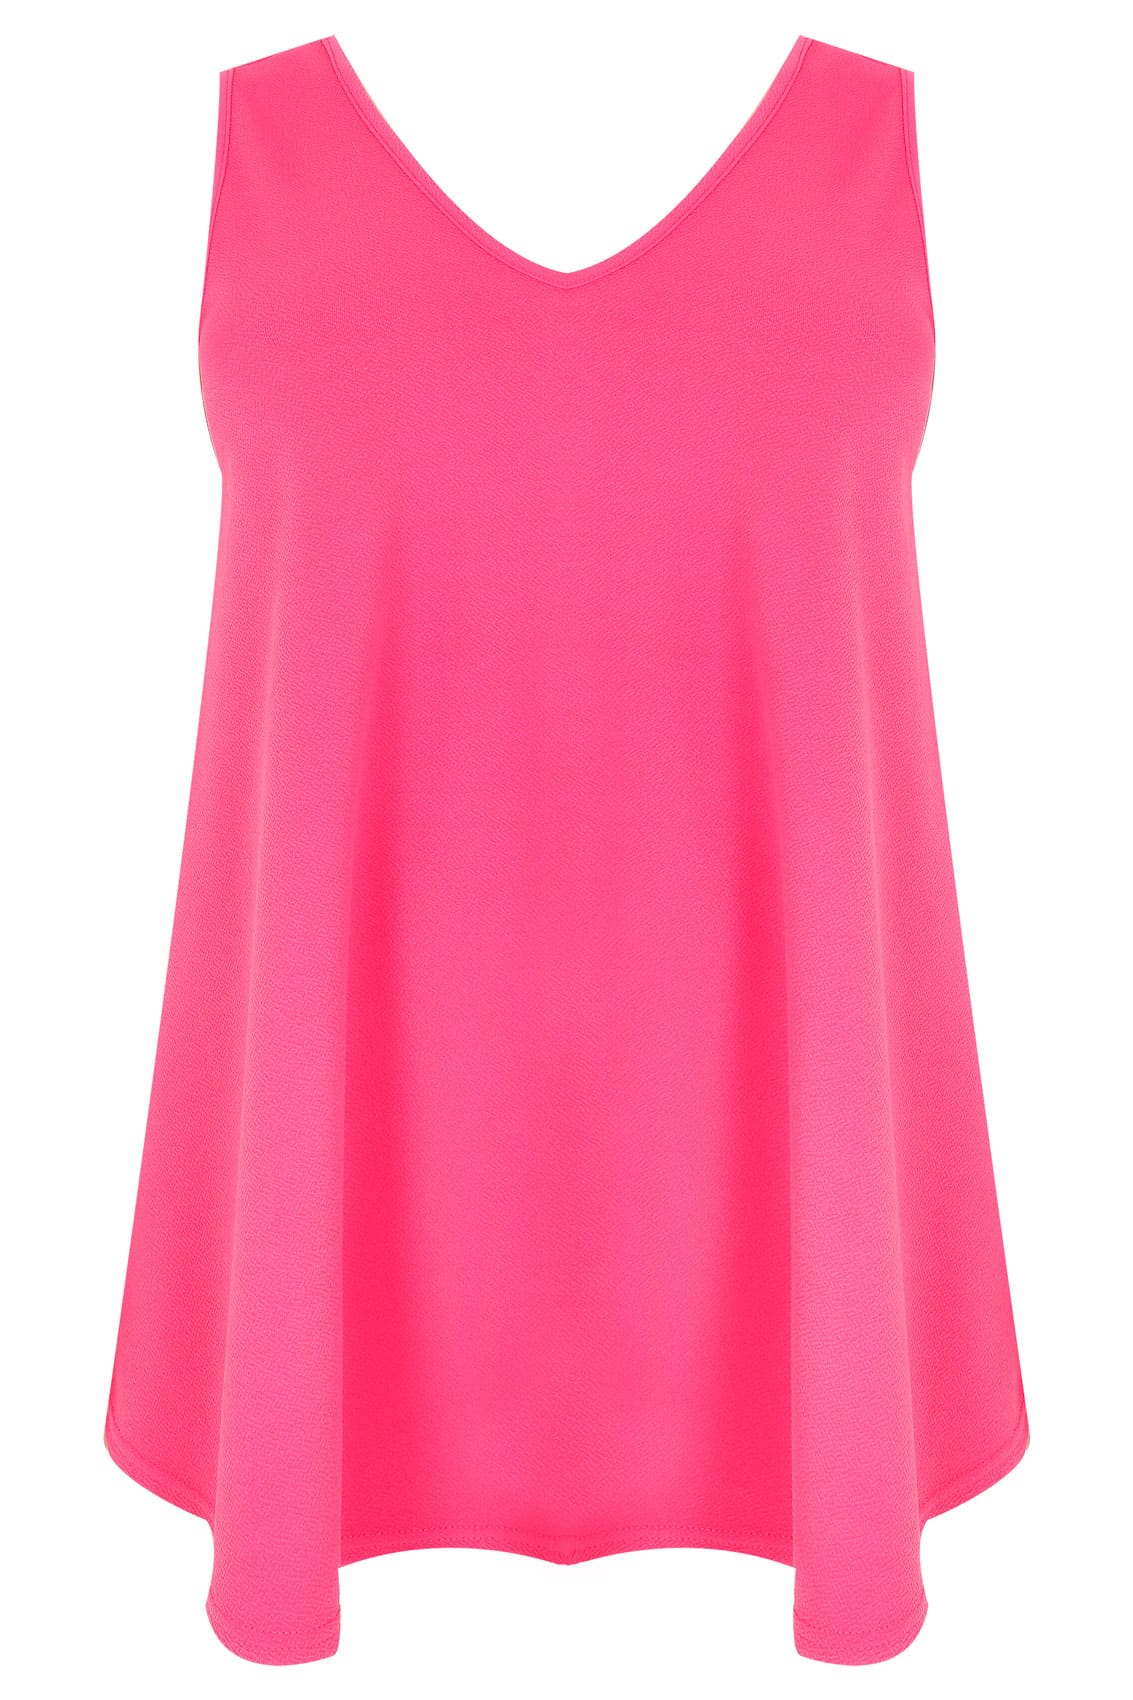 Hot Pink Sleeveless Swing Top Plus size 16 to 36